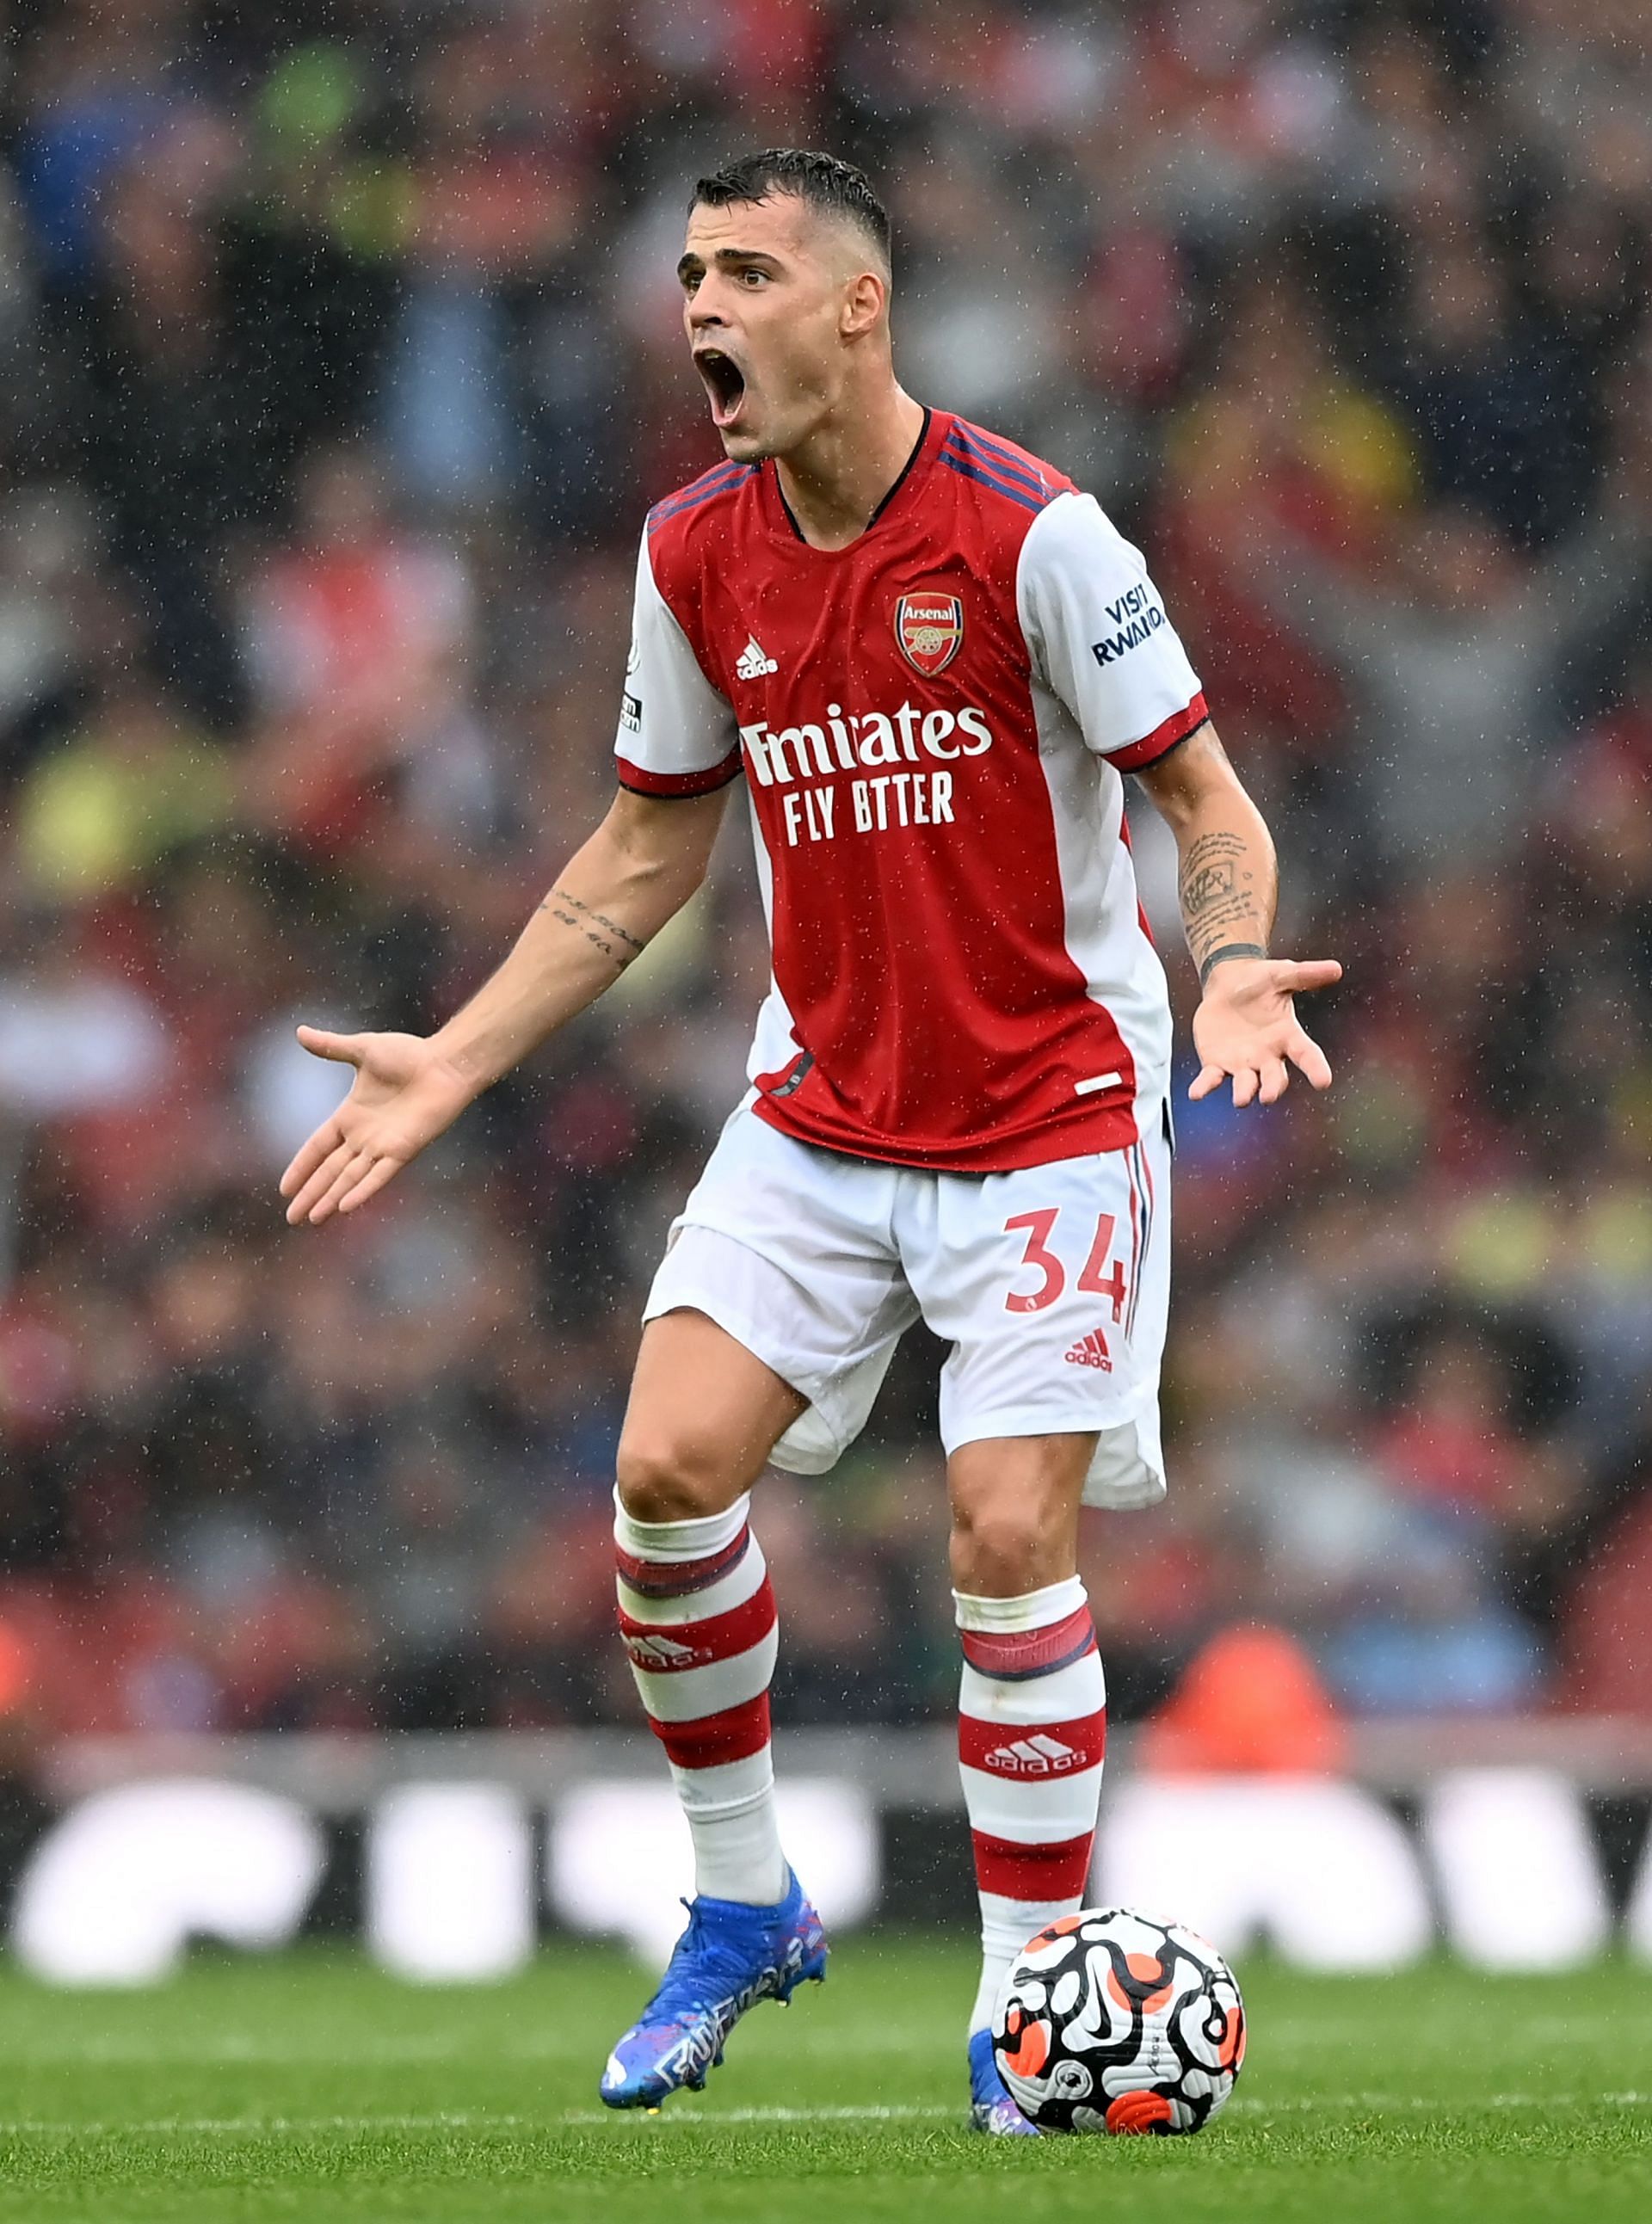 Xhaka could feature against Everton.